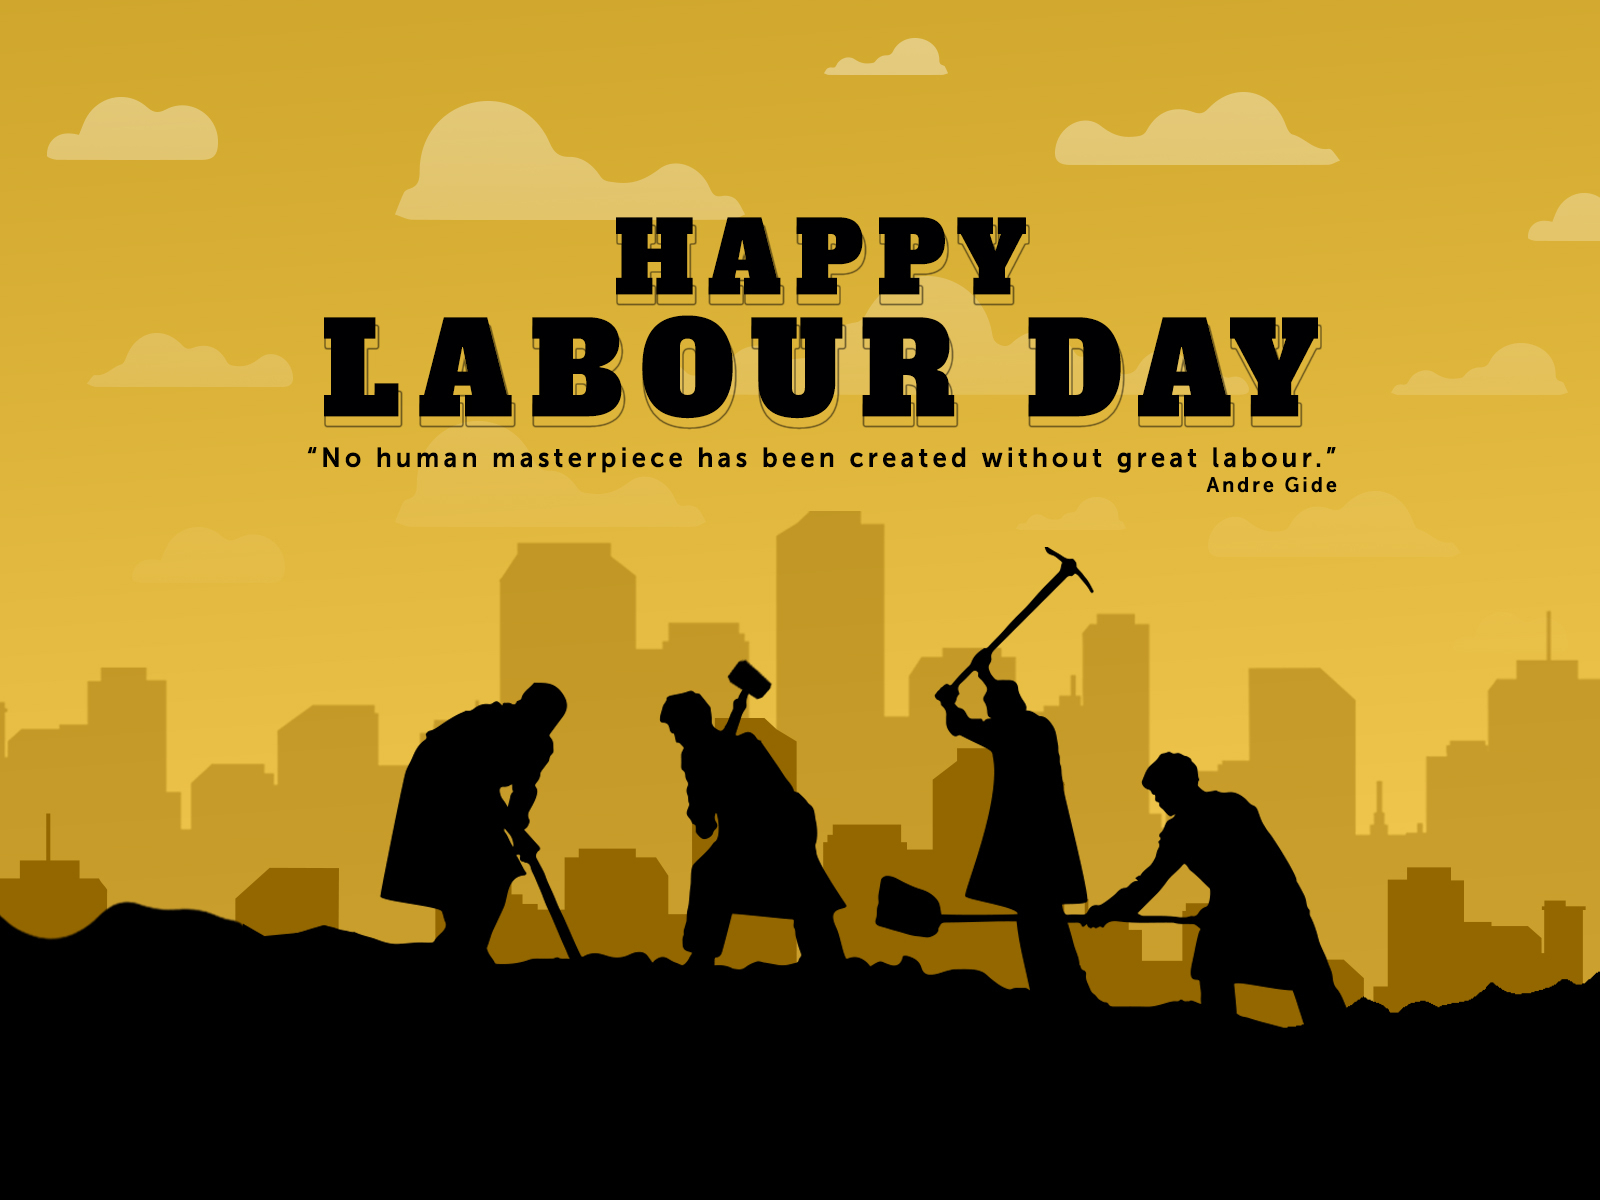 Labour Day 2022 by Waqas Ali on Dribbble